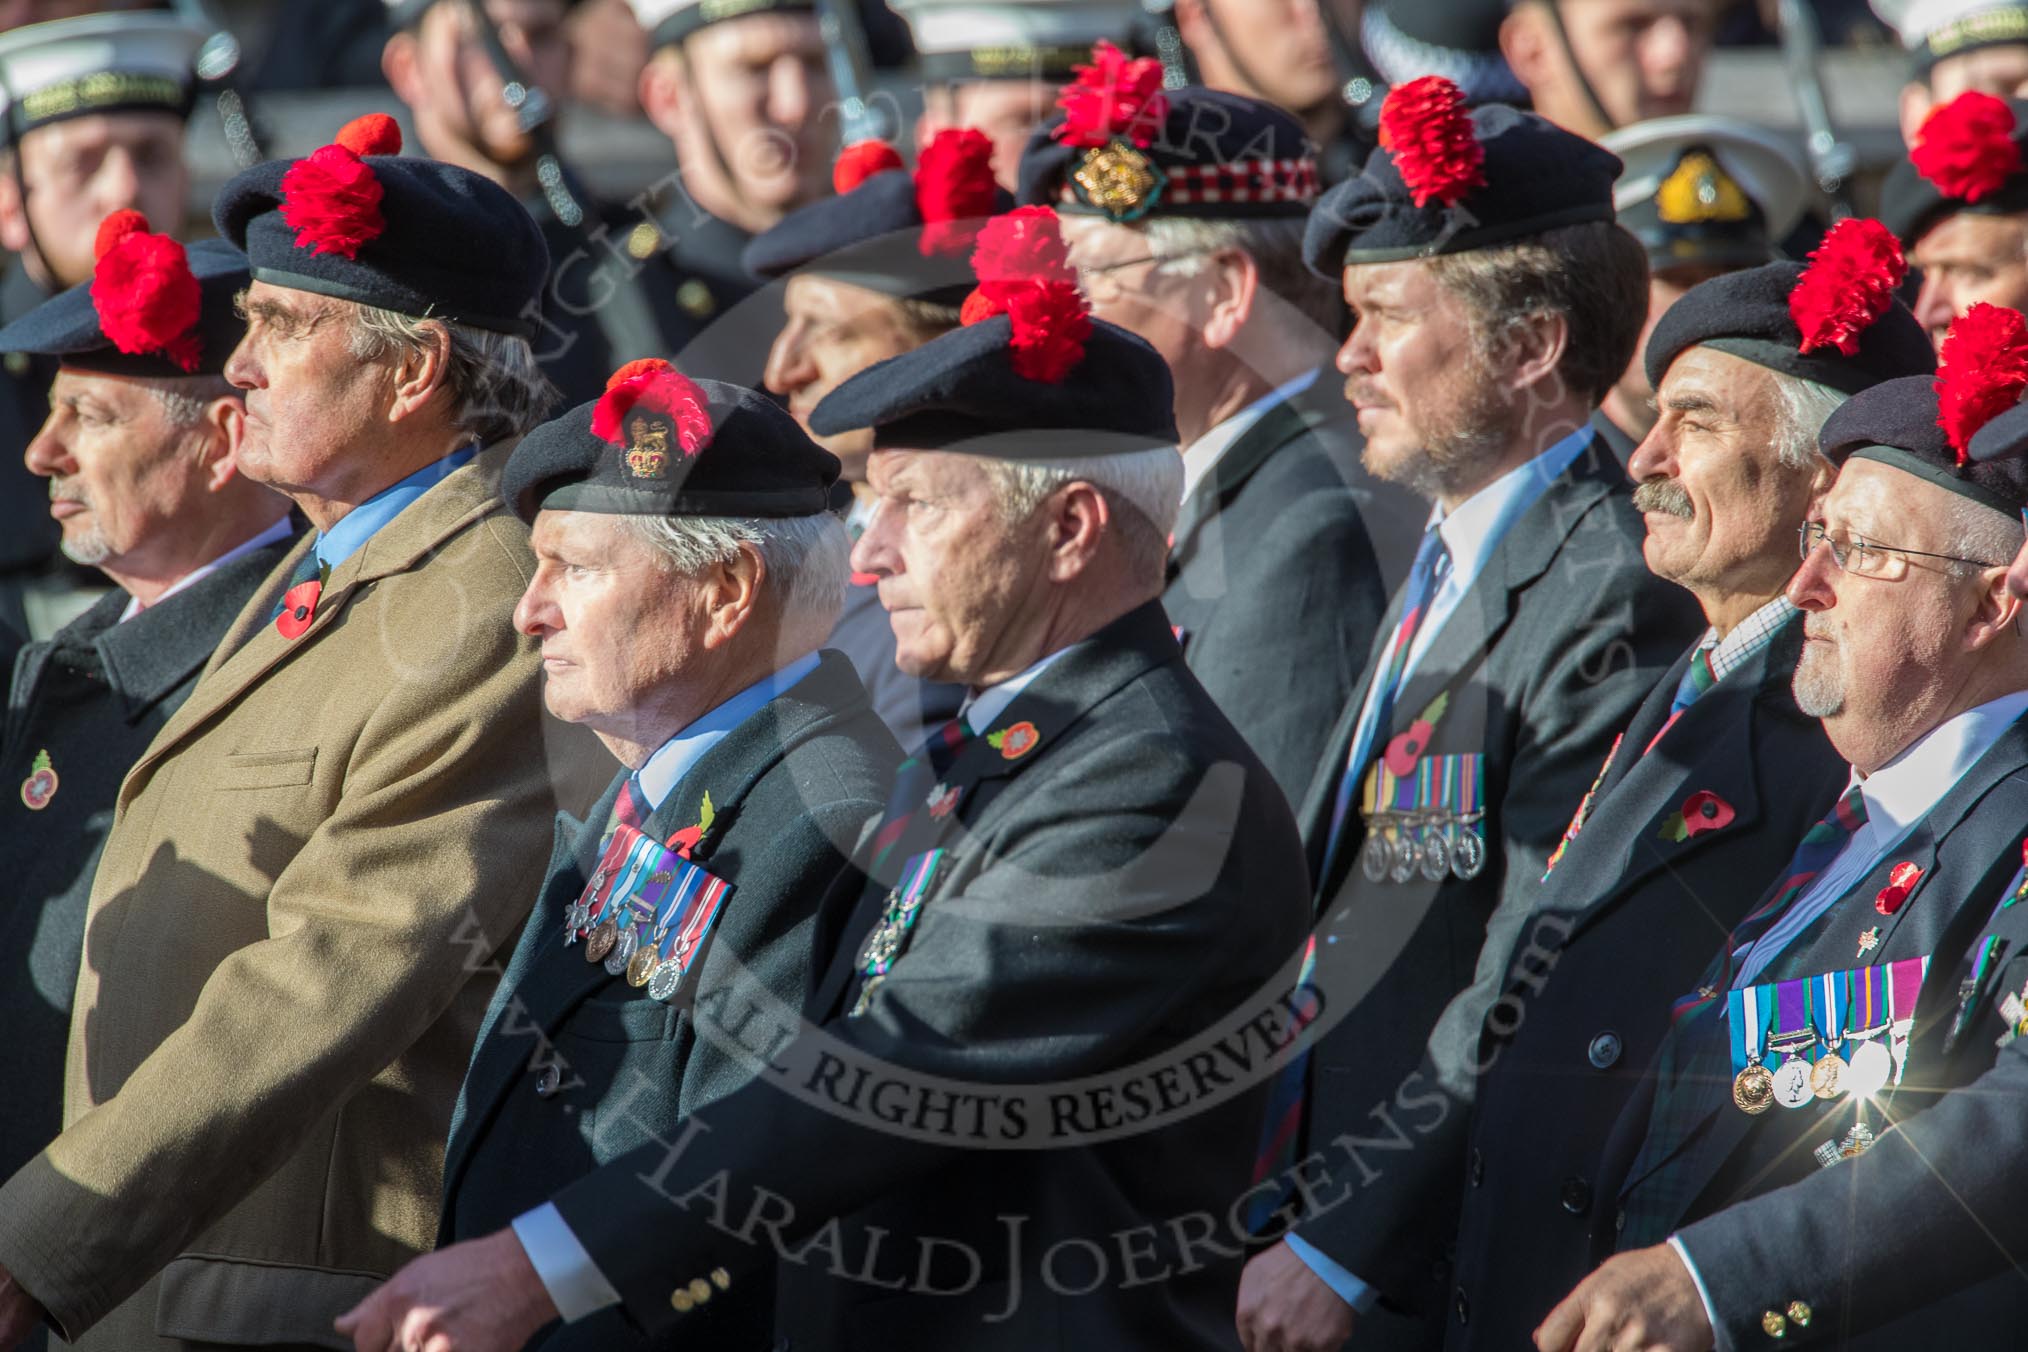 The Black Watch Association - London Branch (Group A10, 72 members) during the Royal British Legion March Past on Remembrance Sunday at the Cenotaph, Whitehall, Westminster, London, 11 November 2018, 11:57.